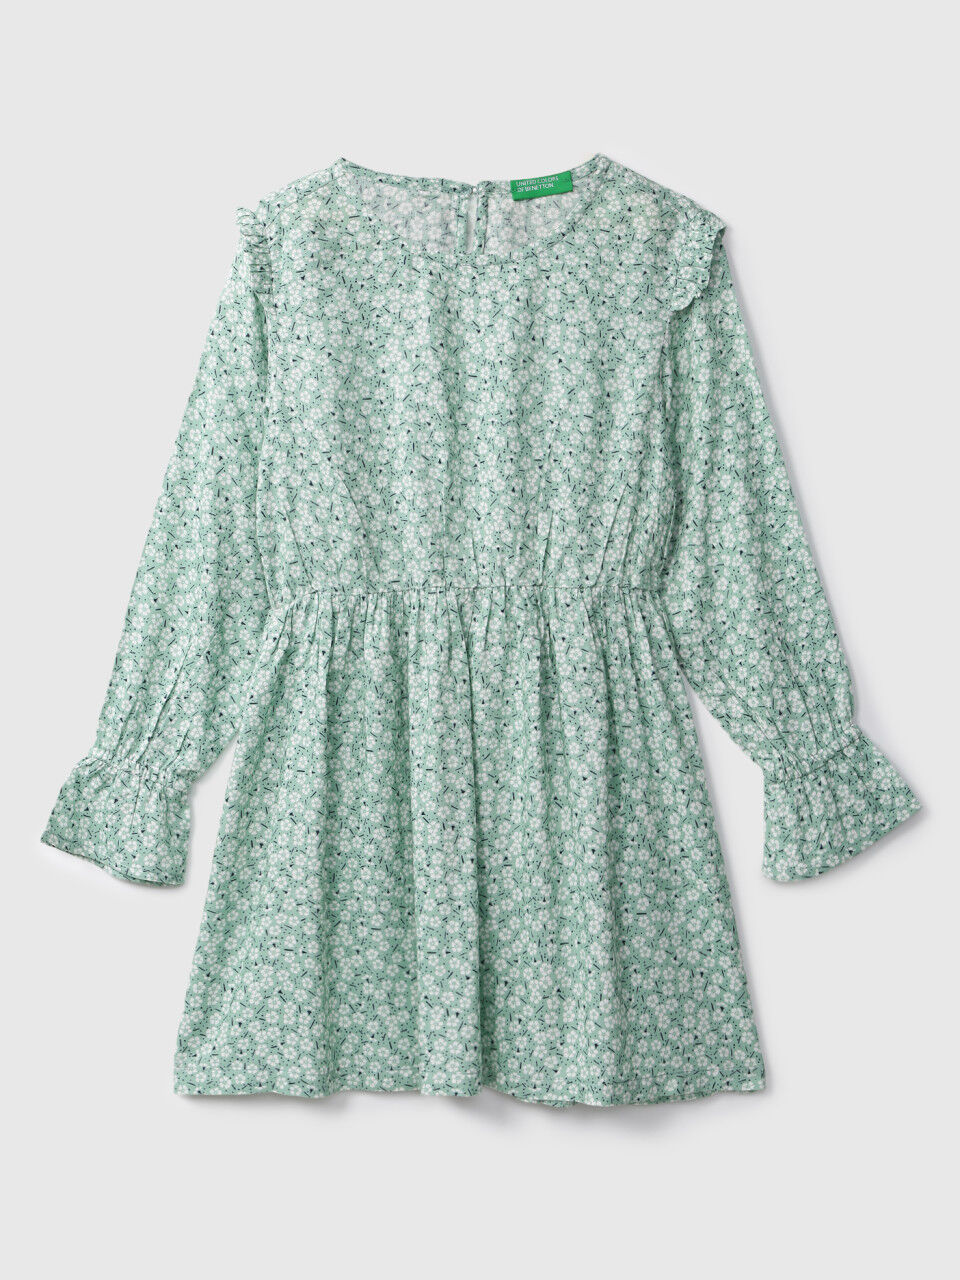 United Colors Of Benetton Girls Floral Teal Dress